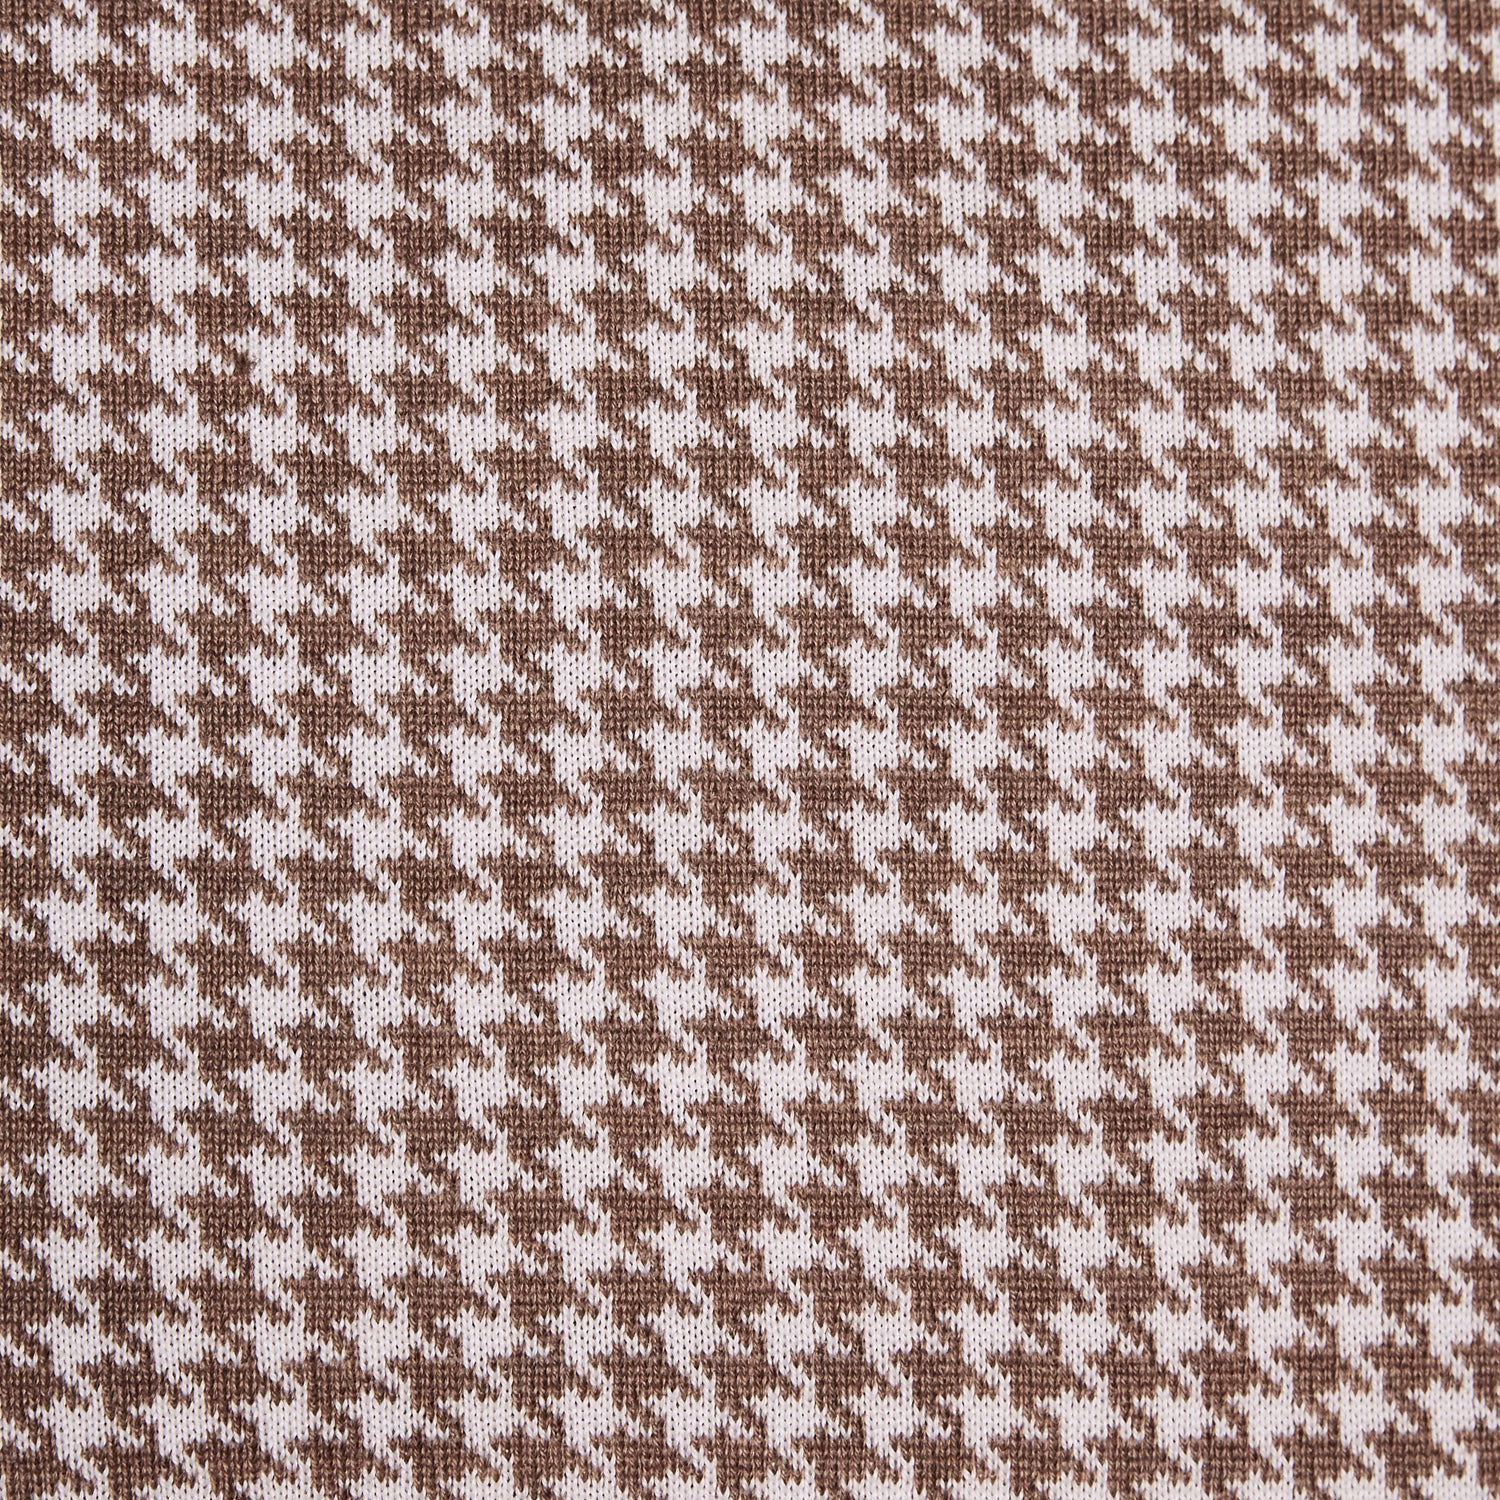 Houndstooth Sand Brown and Seashell White Cushion